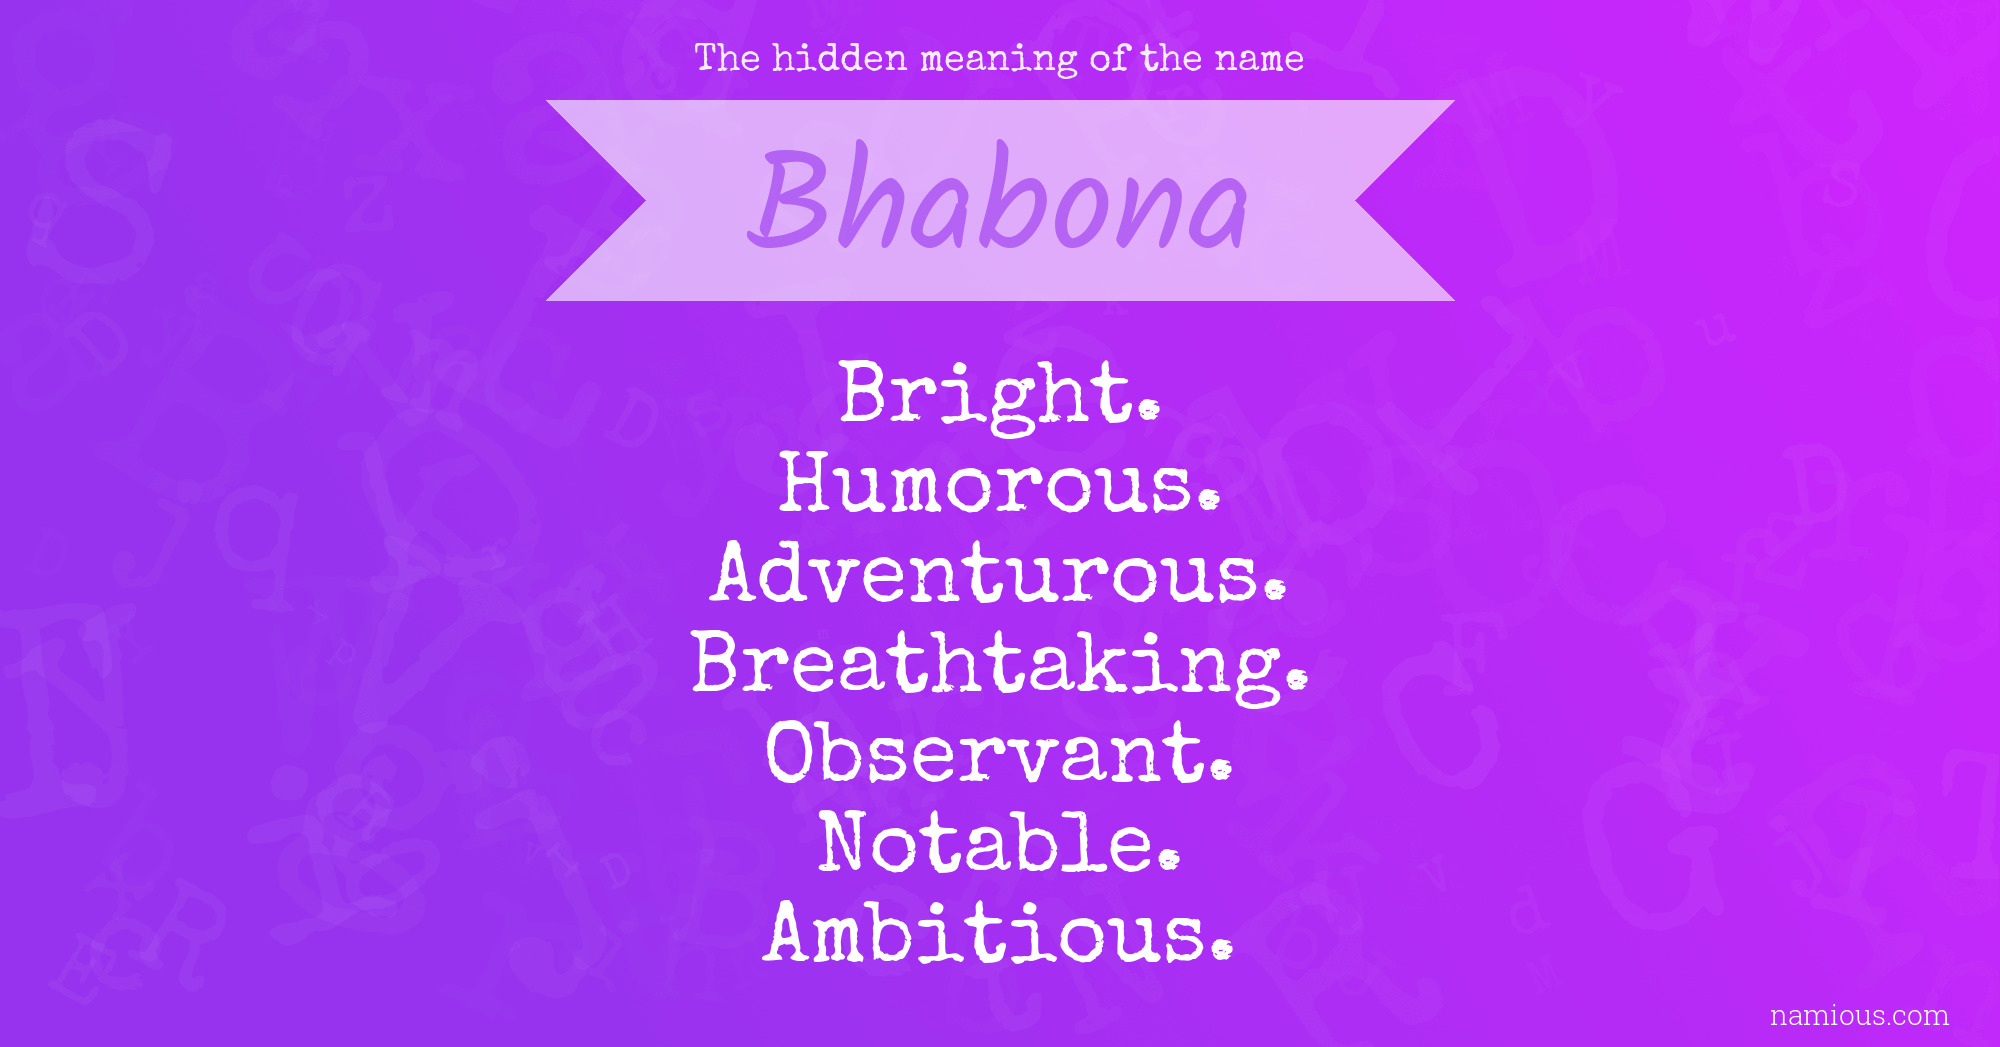 The hidden meaning of the name Bhabona